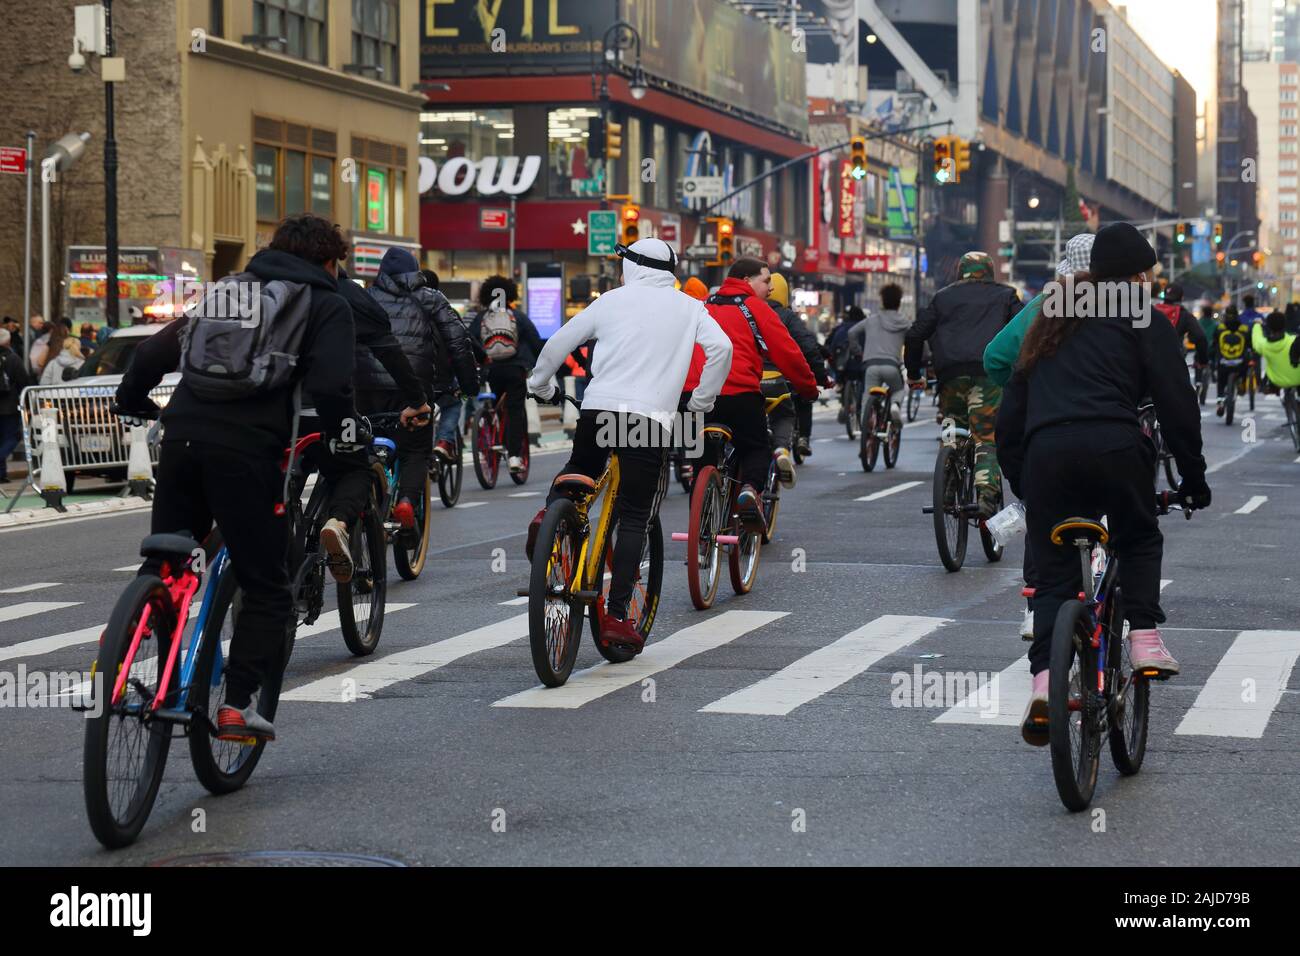 A 'wheelie crew' of young people of color riding bikes en masse in New York City (December 31, 2019) Stock Photo